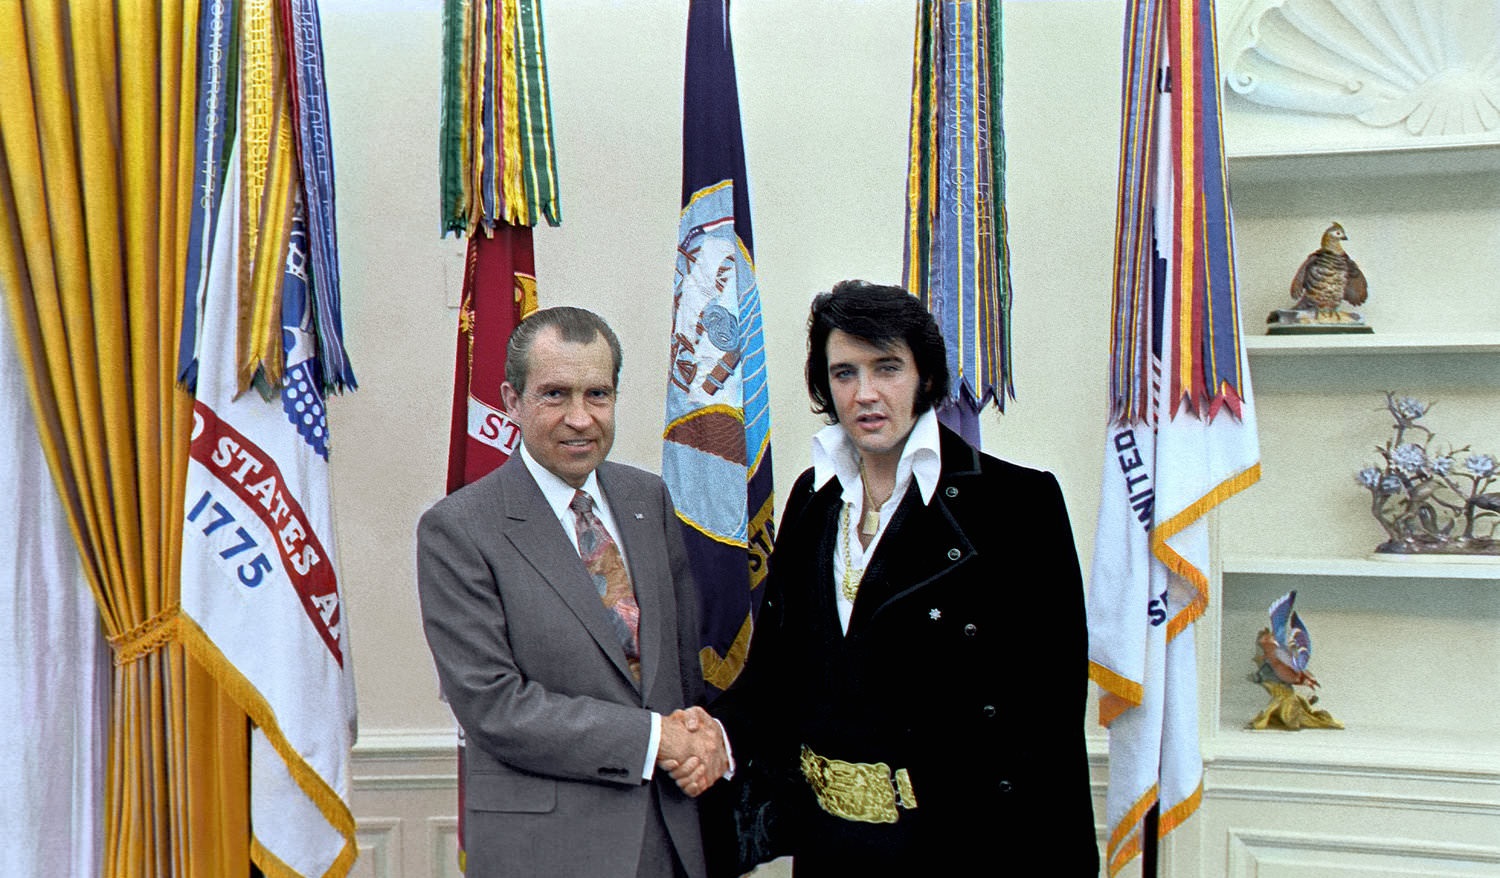 Richard M. Nixon and Elvis Presley at the White House, 12/21/1970